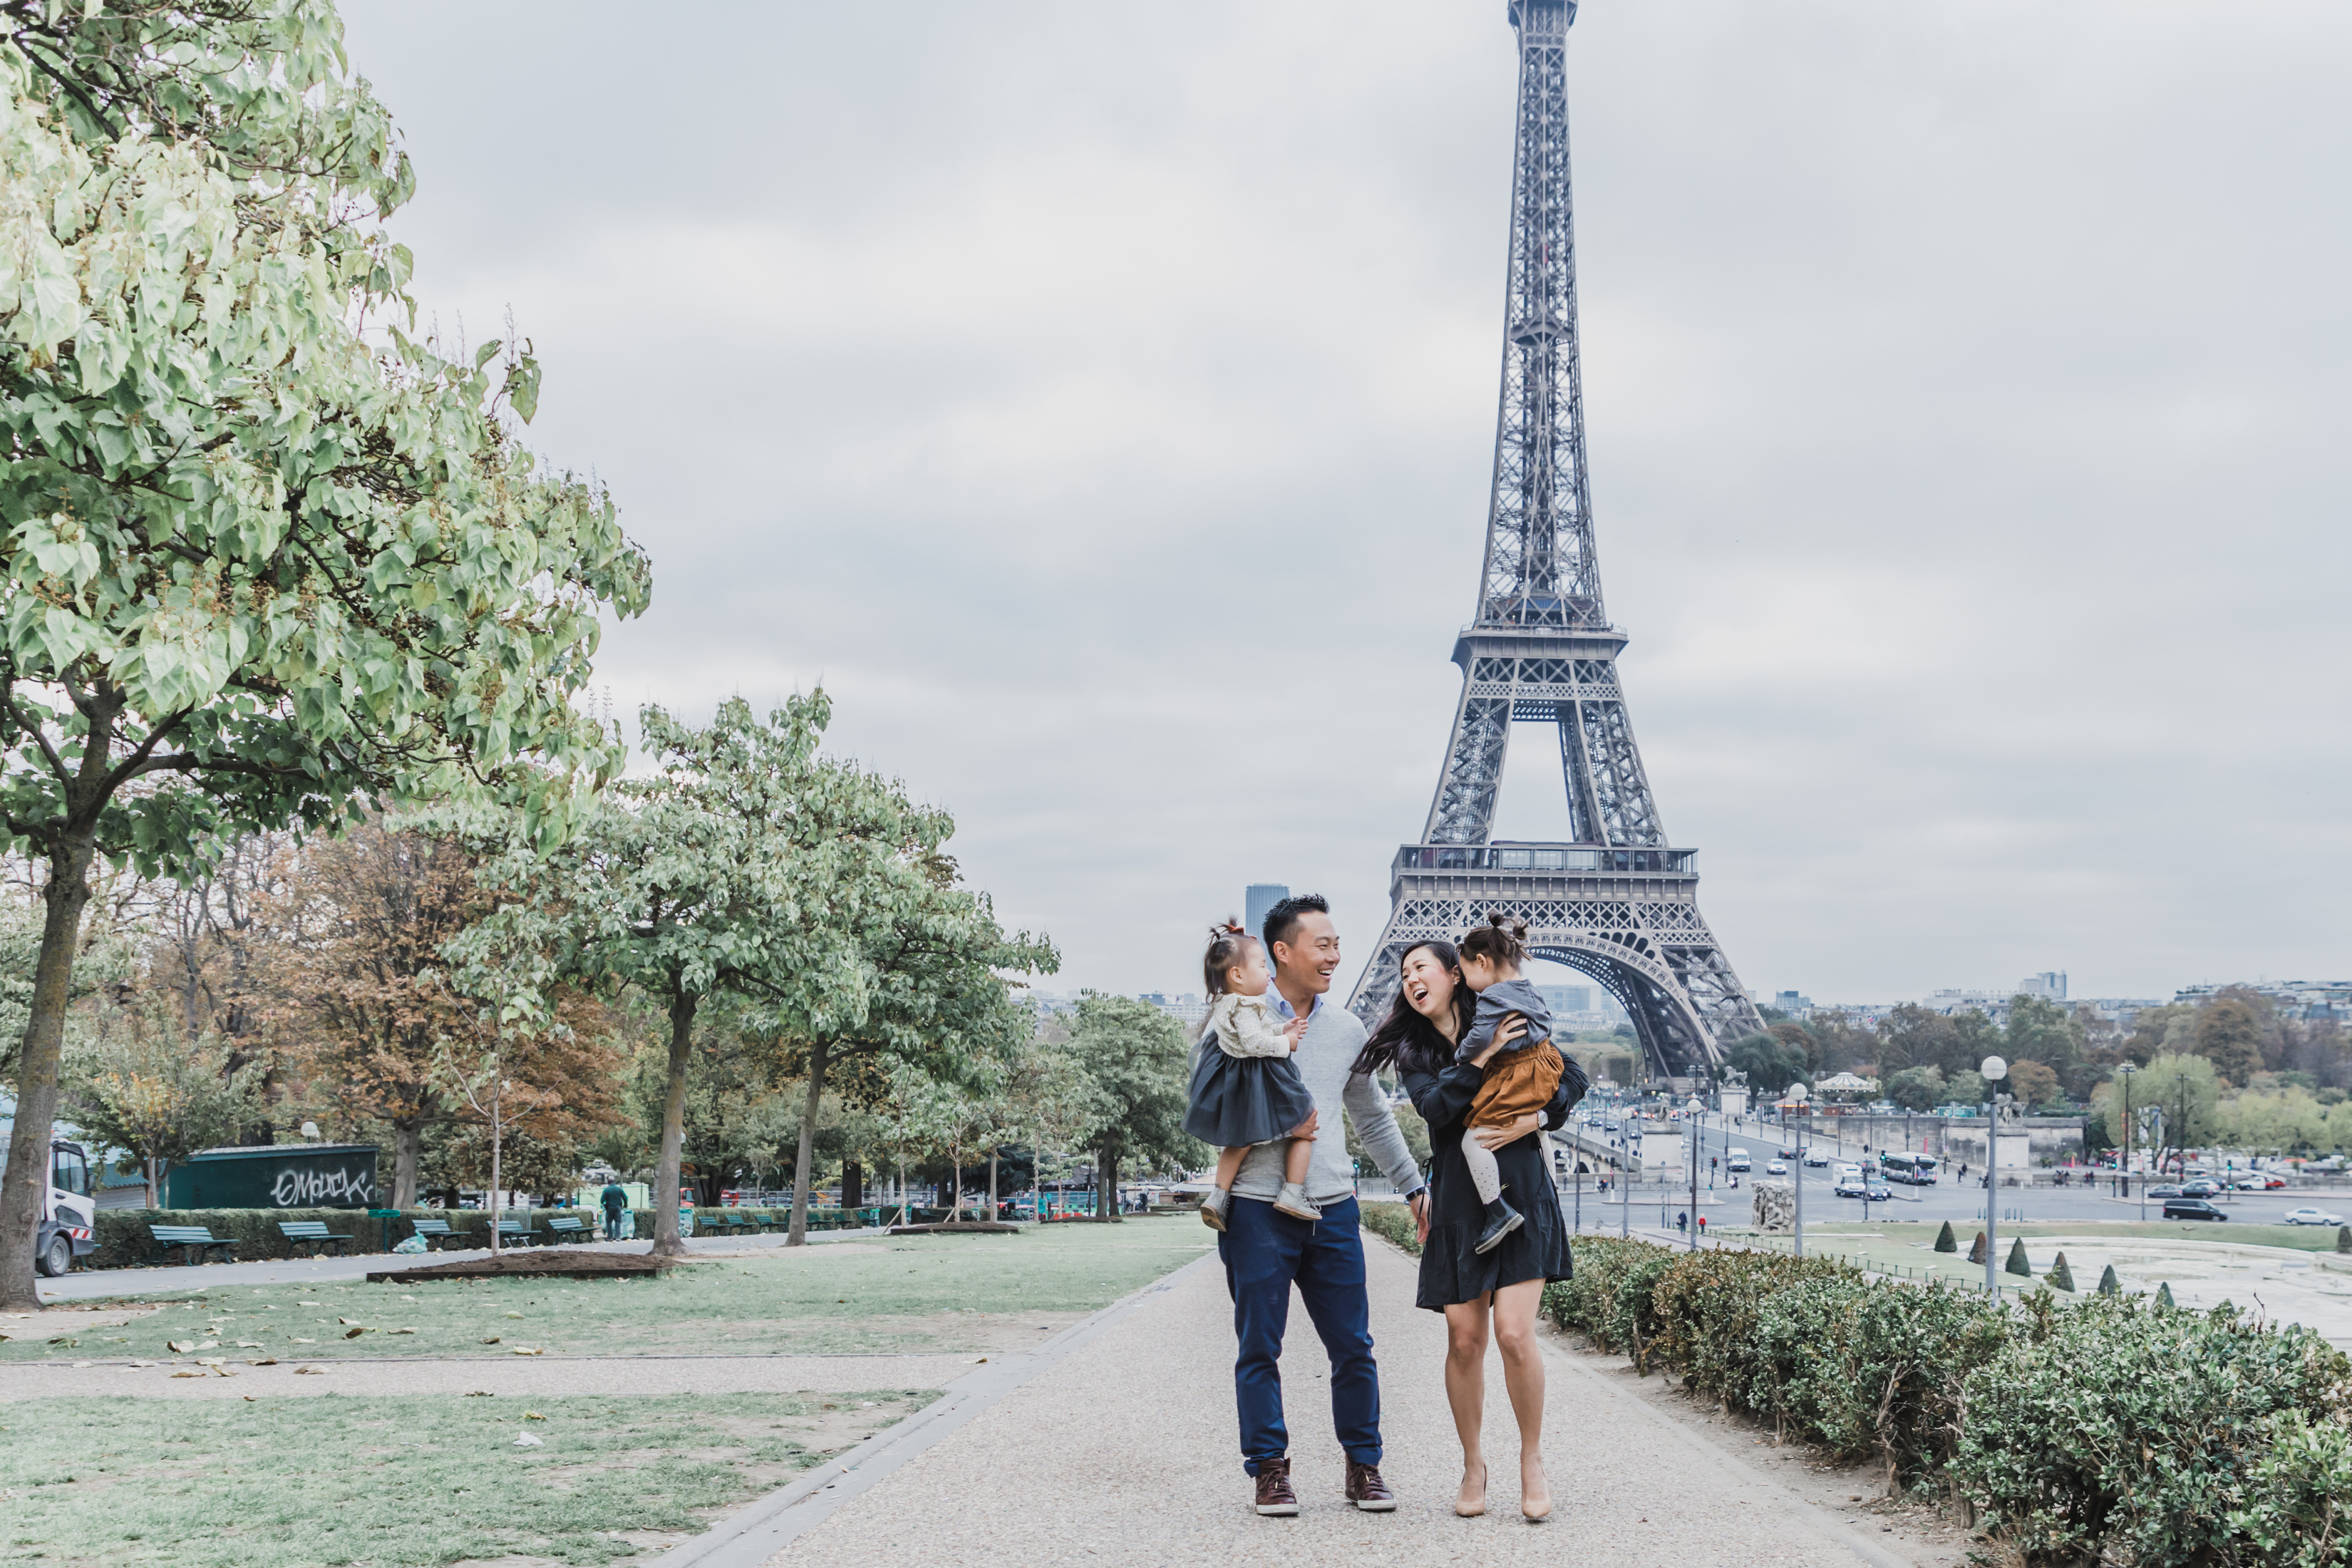 Family of four in front of the Eiffel Tower in Paris, France